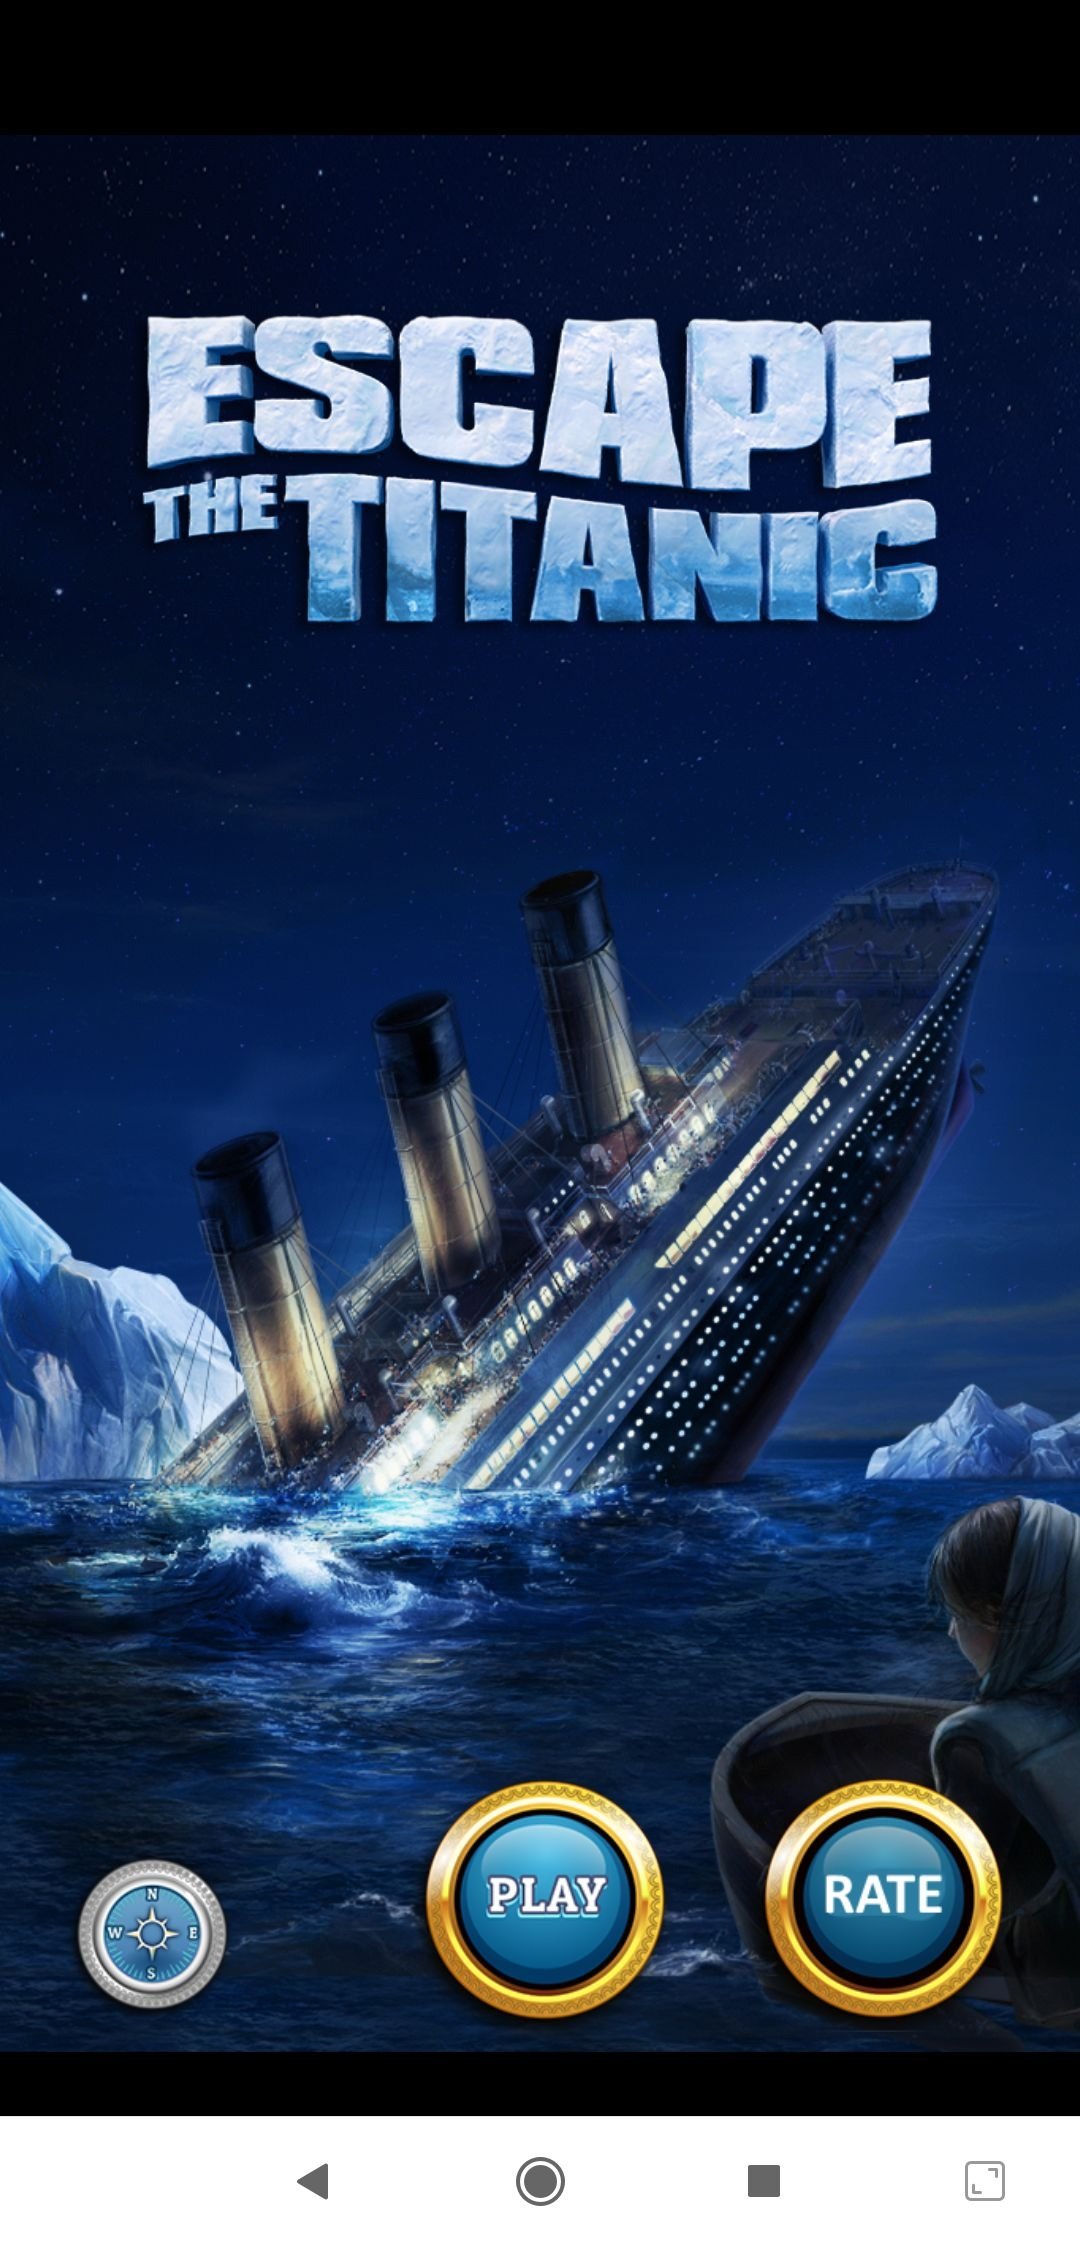 download the new version for android Titanic